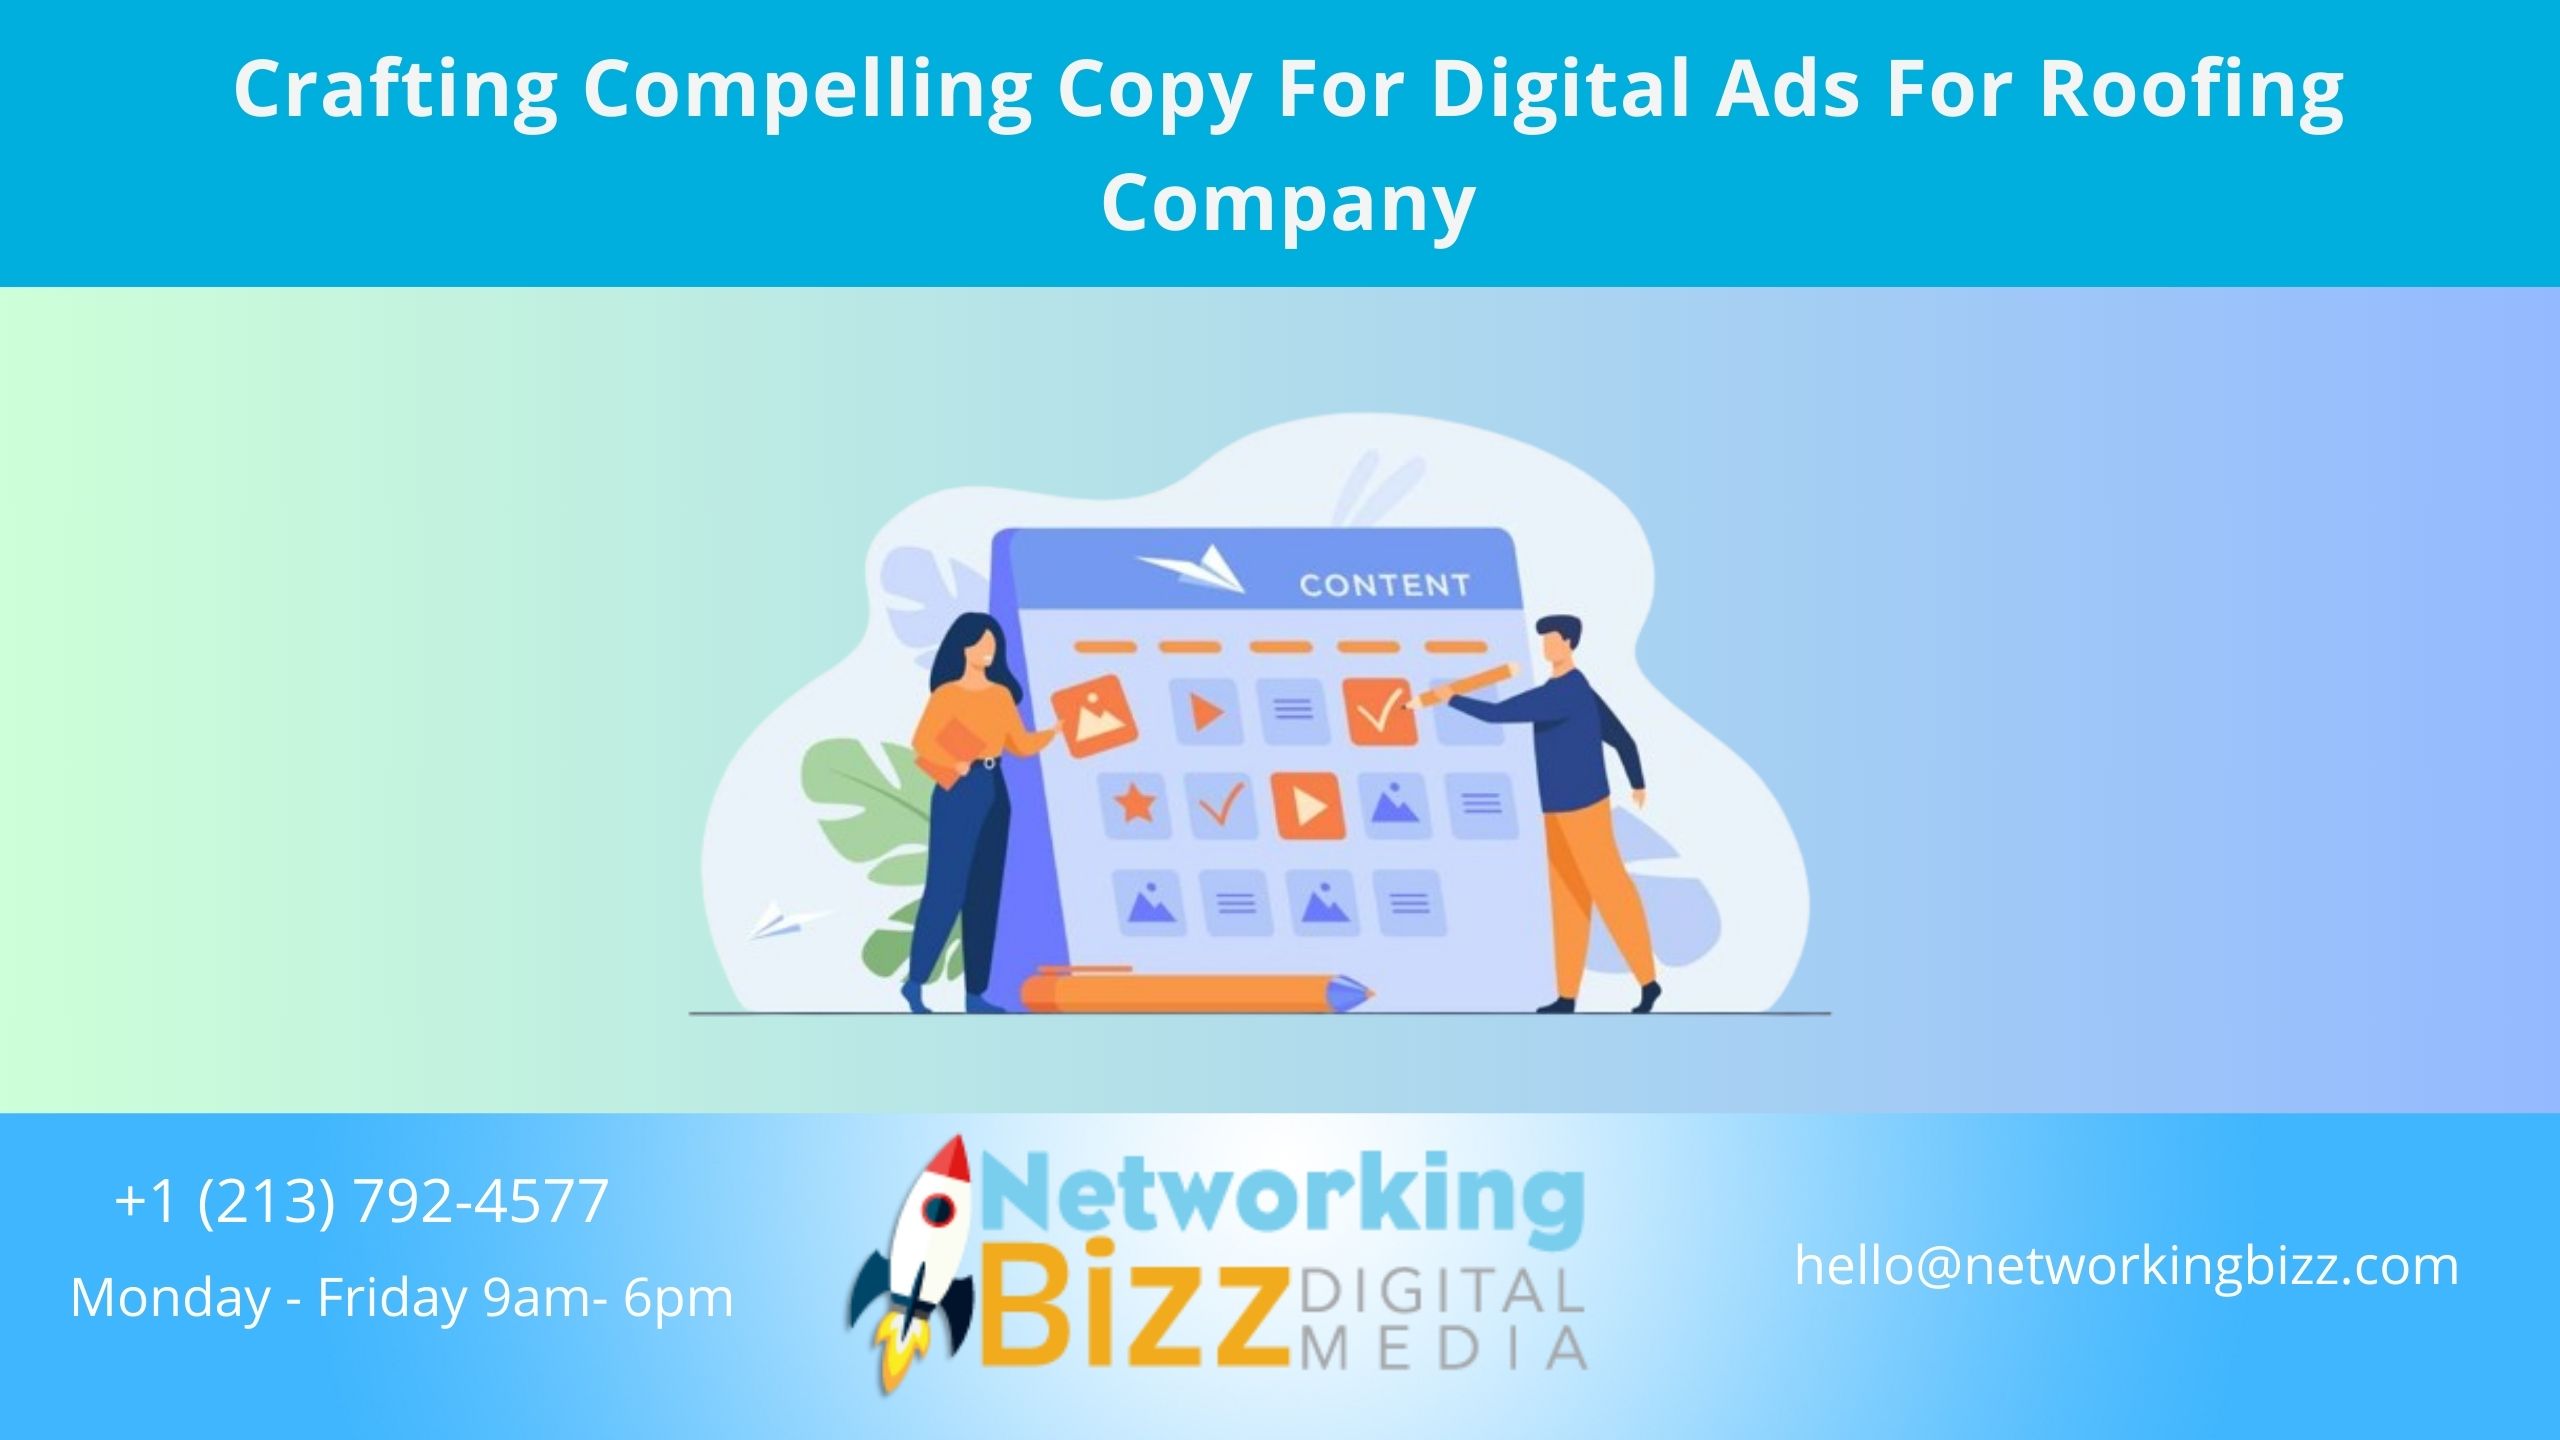 Crafting Compelling Copy For Digital Ads For Roofing Company